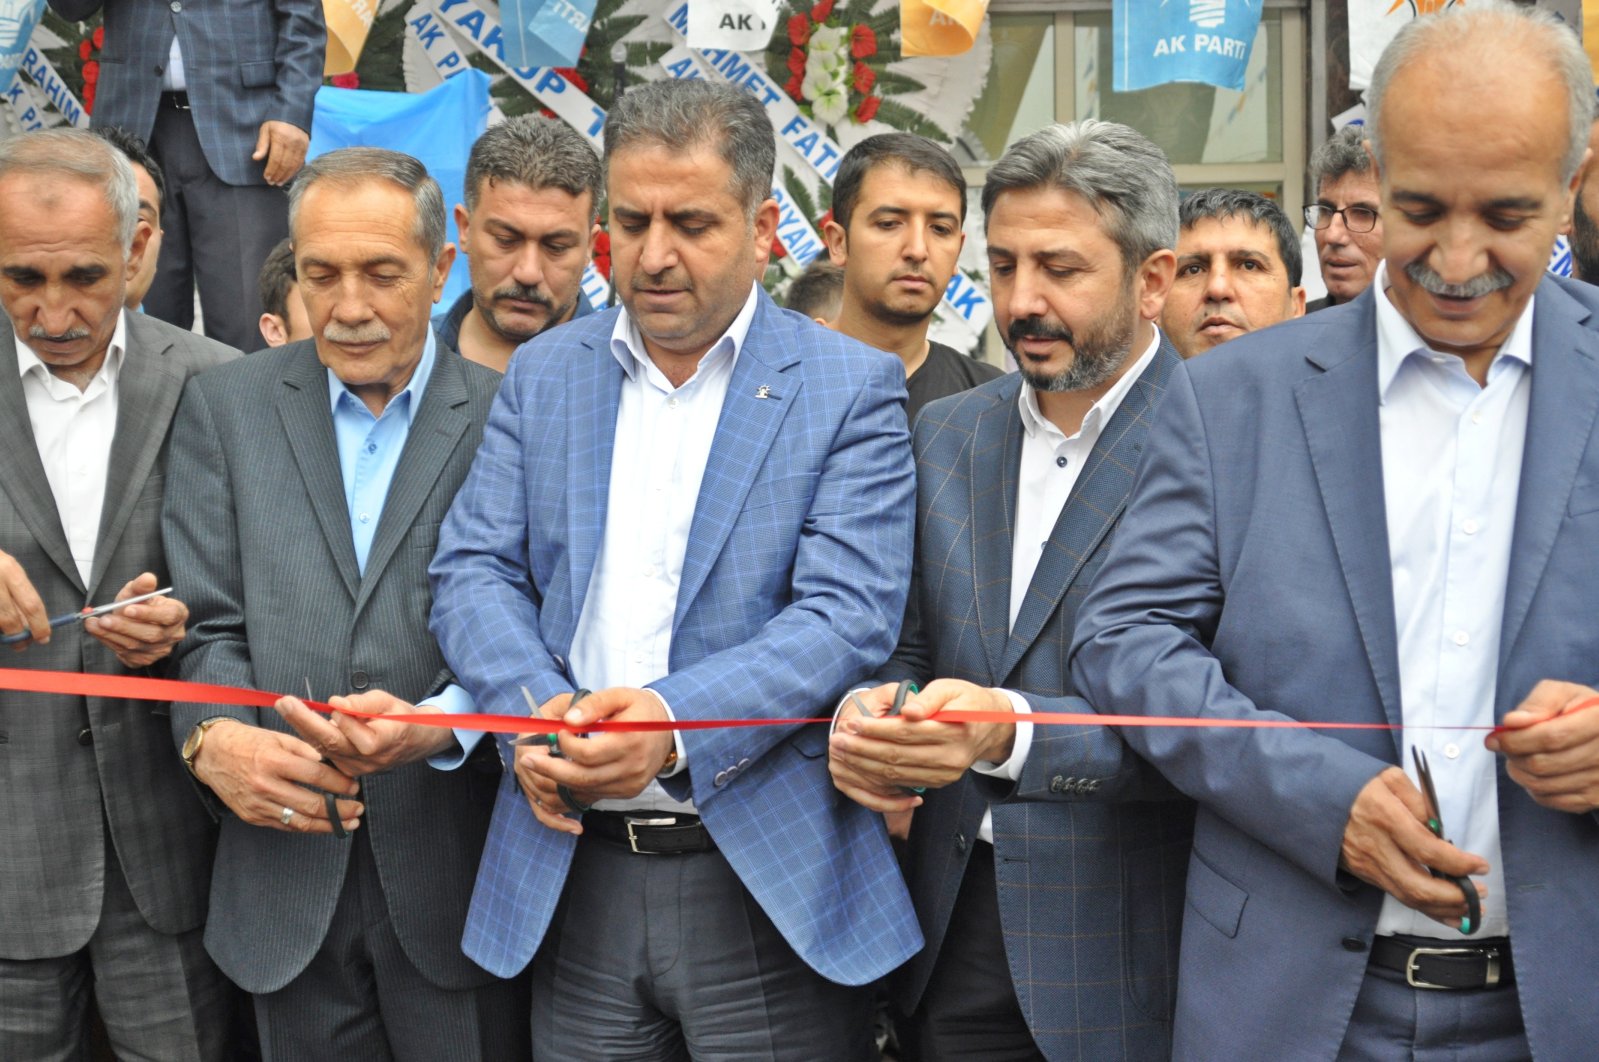 The body of AK Party deputy Yakup Taş, who was in the wreckage in the earthquake in Adıyaman, has been reached. Yakup Taş (1-L) is seen here attending the opening of his party&#039;s Election Liaison Office in Gölbaşı district of Adıyaman with Ahmet Aydın (2-R) and AK Party Adıyaman deputy Ibrahim Halil Fırat (3-R), Türkiye, May 28, 2018. (AA File Photo)